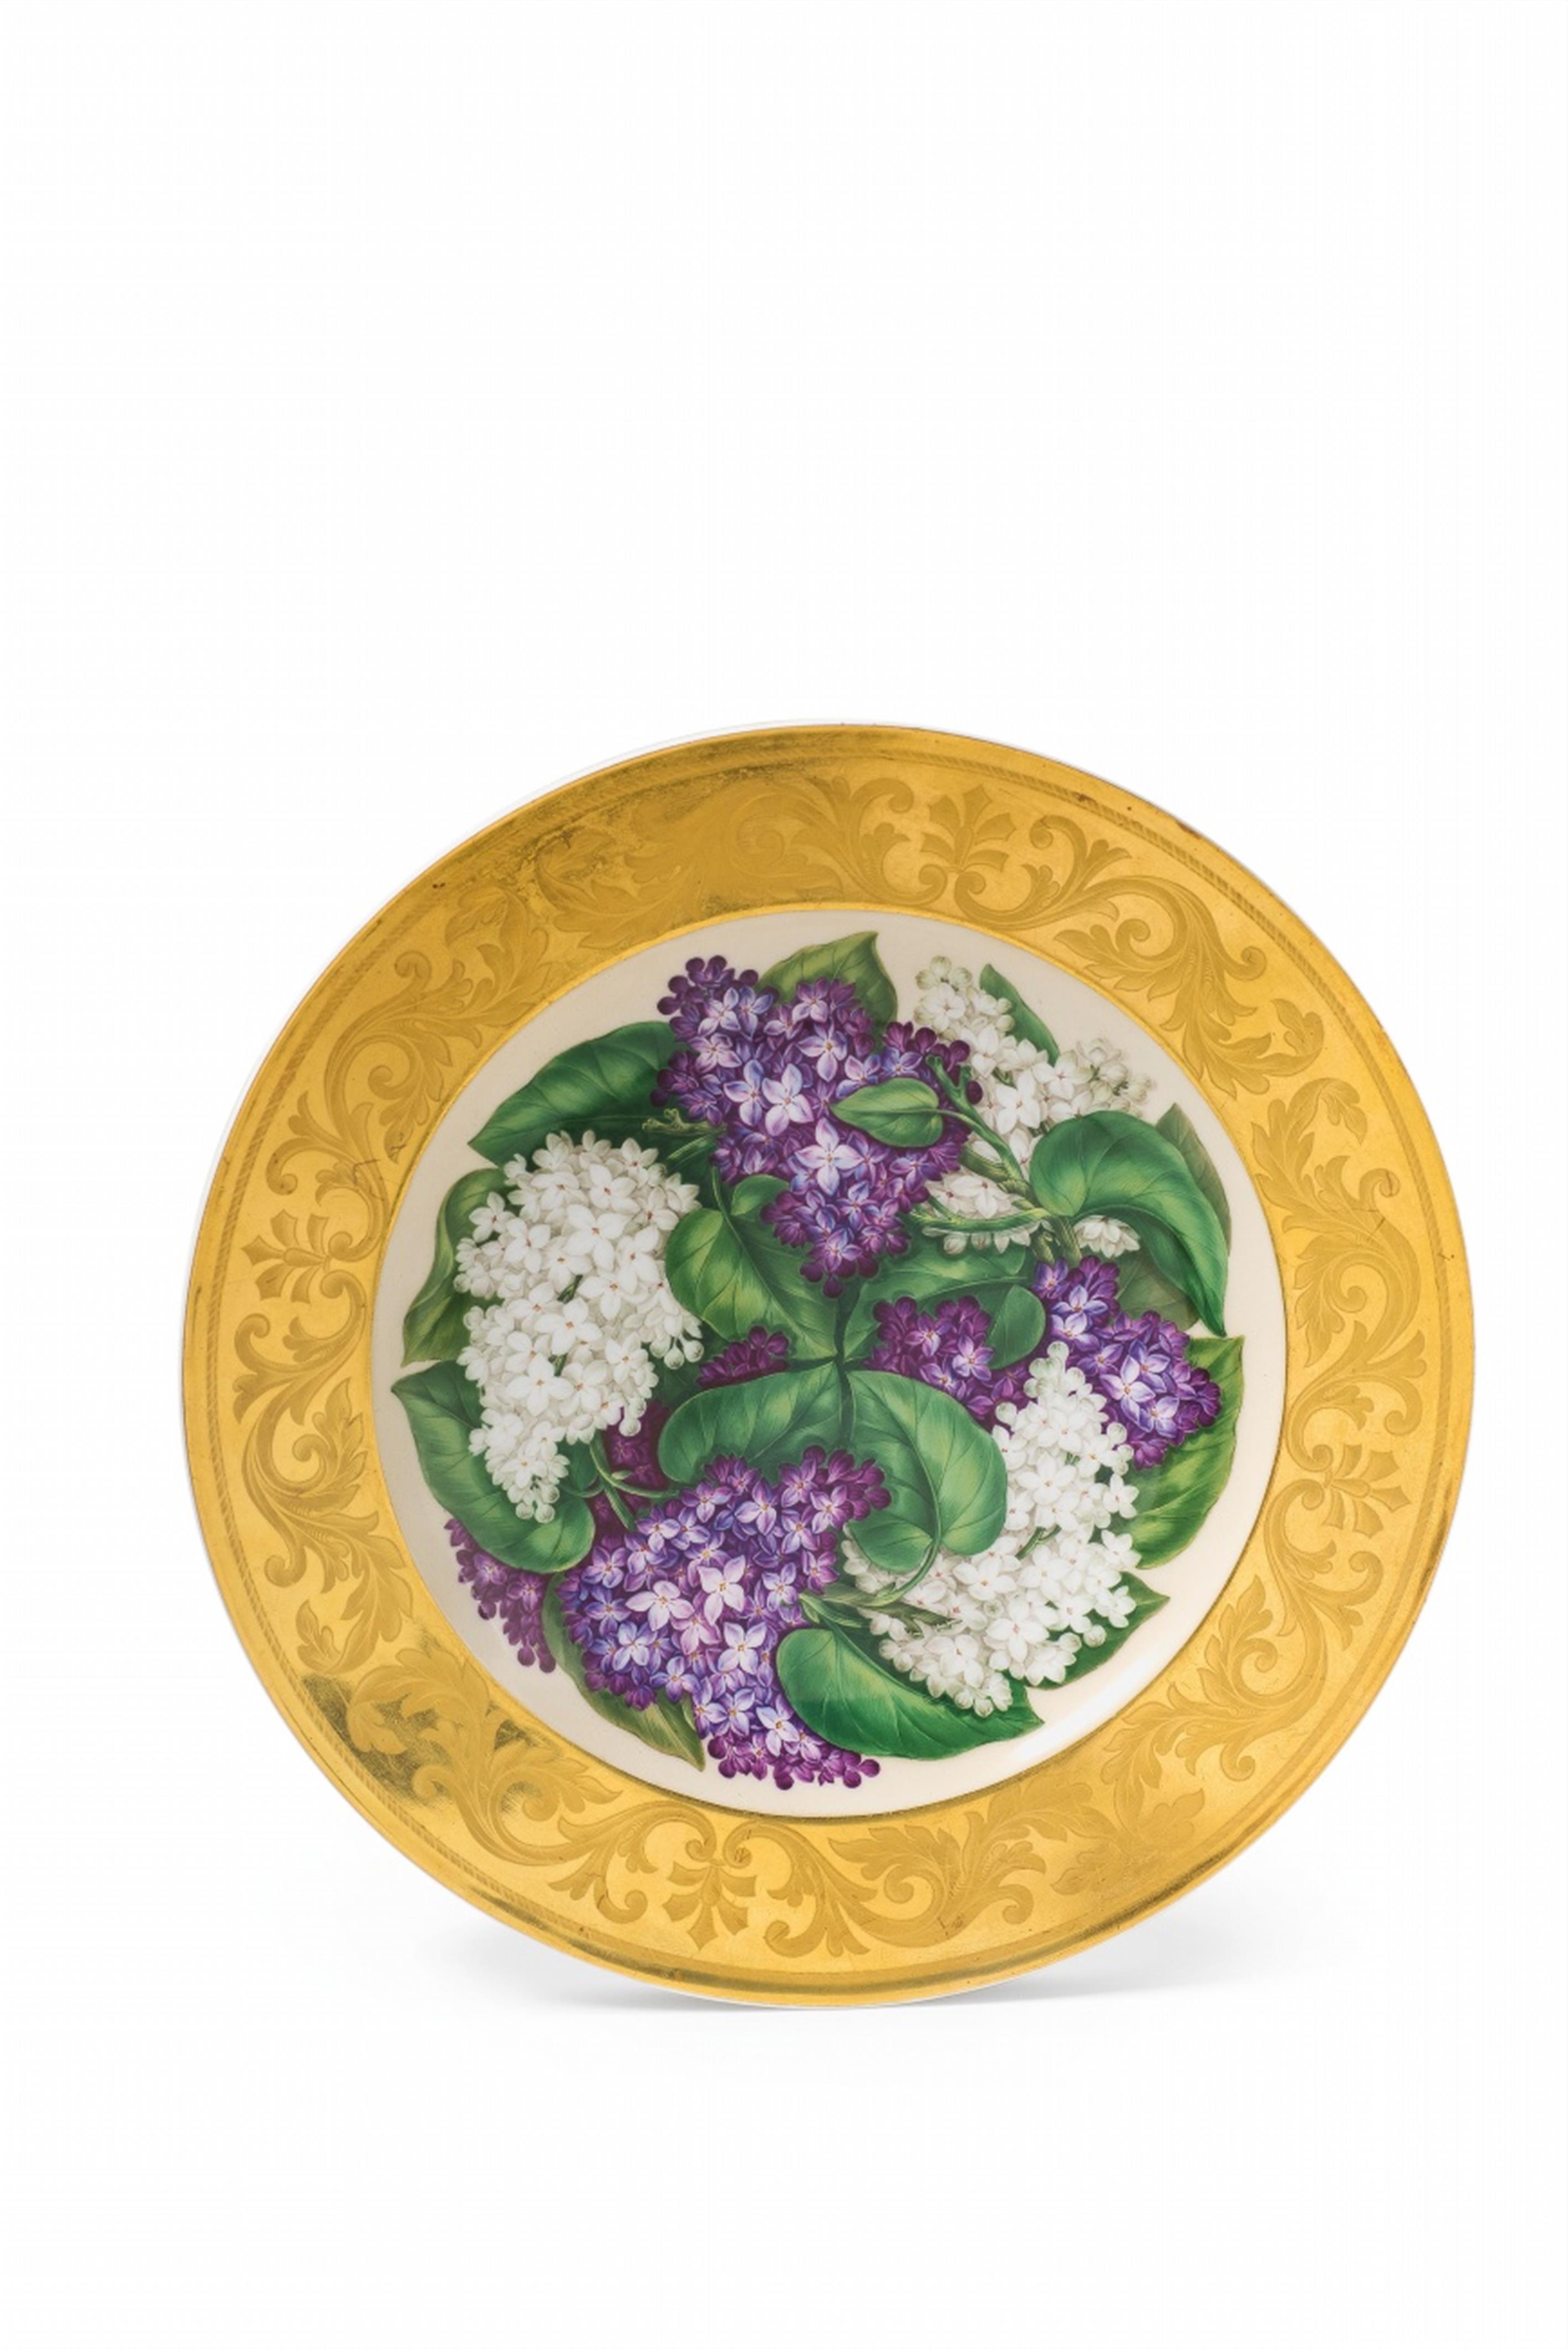 A Berlin KPM porcelain plate with lilac flowers - image-1